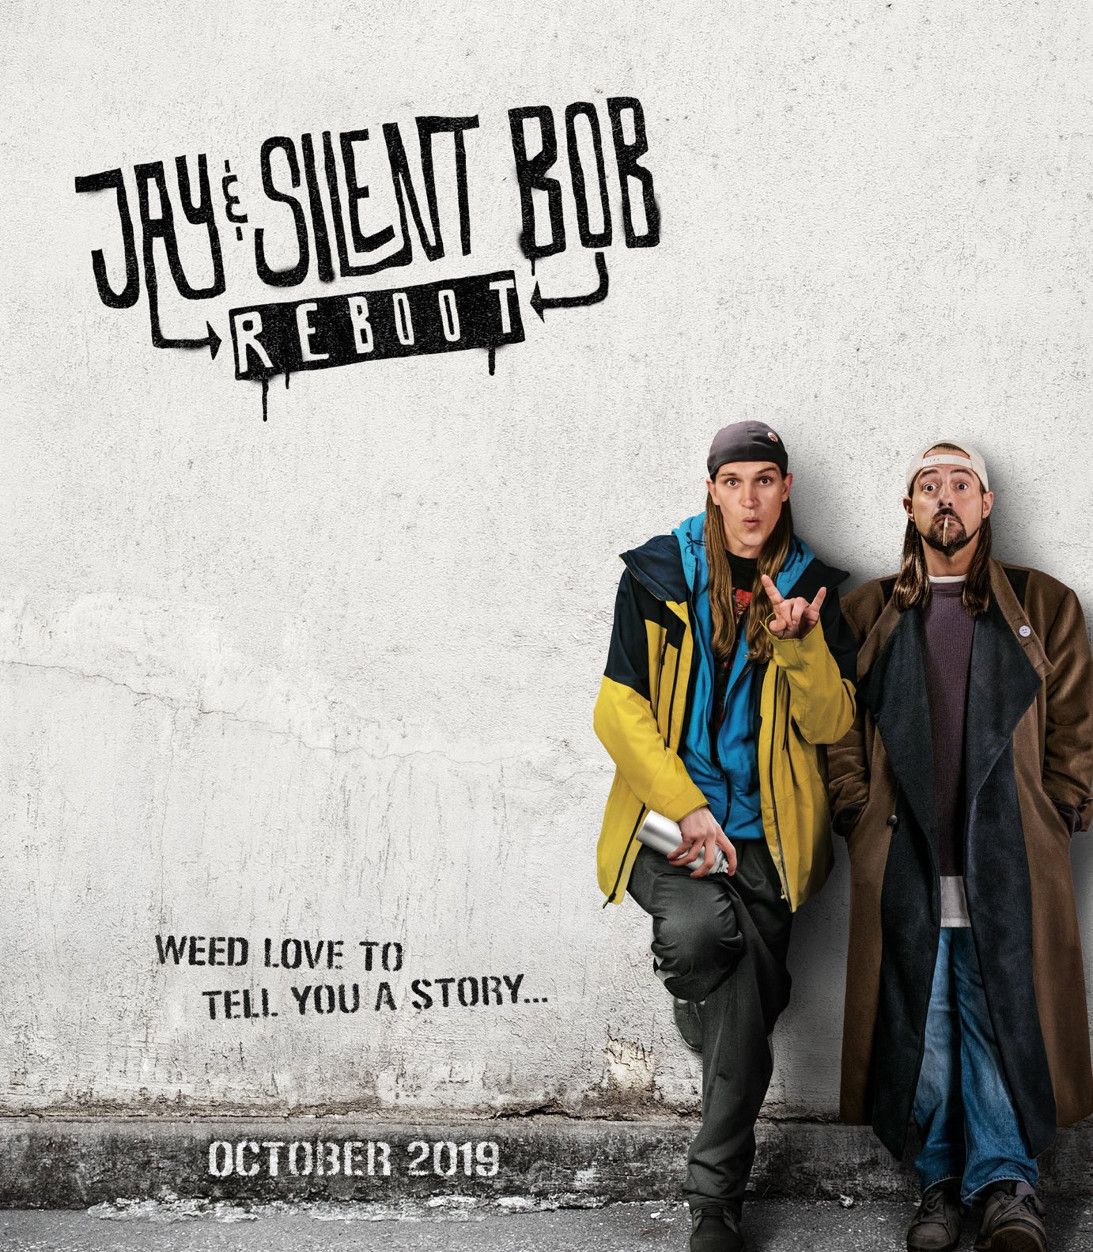 Jay and Silent bob Reboot Poster Vertical